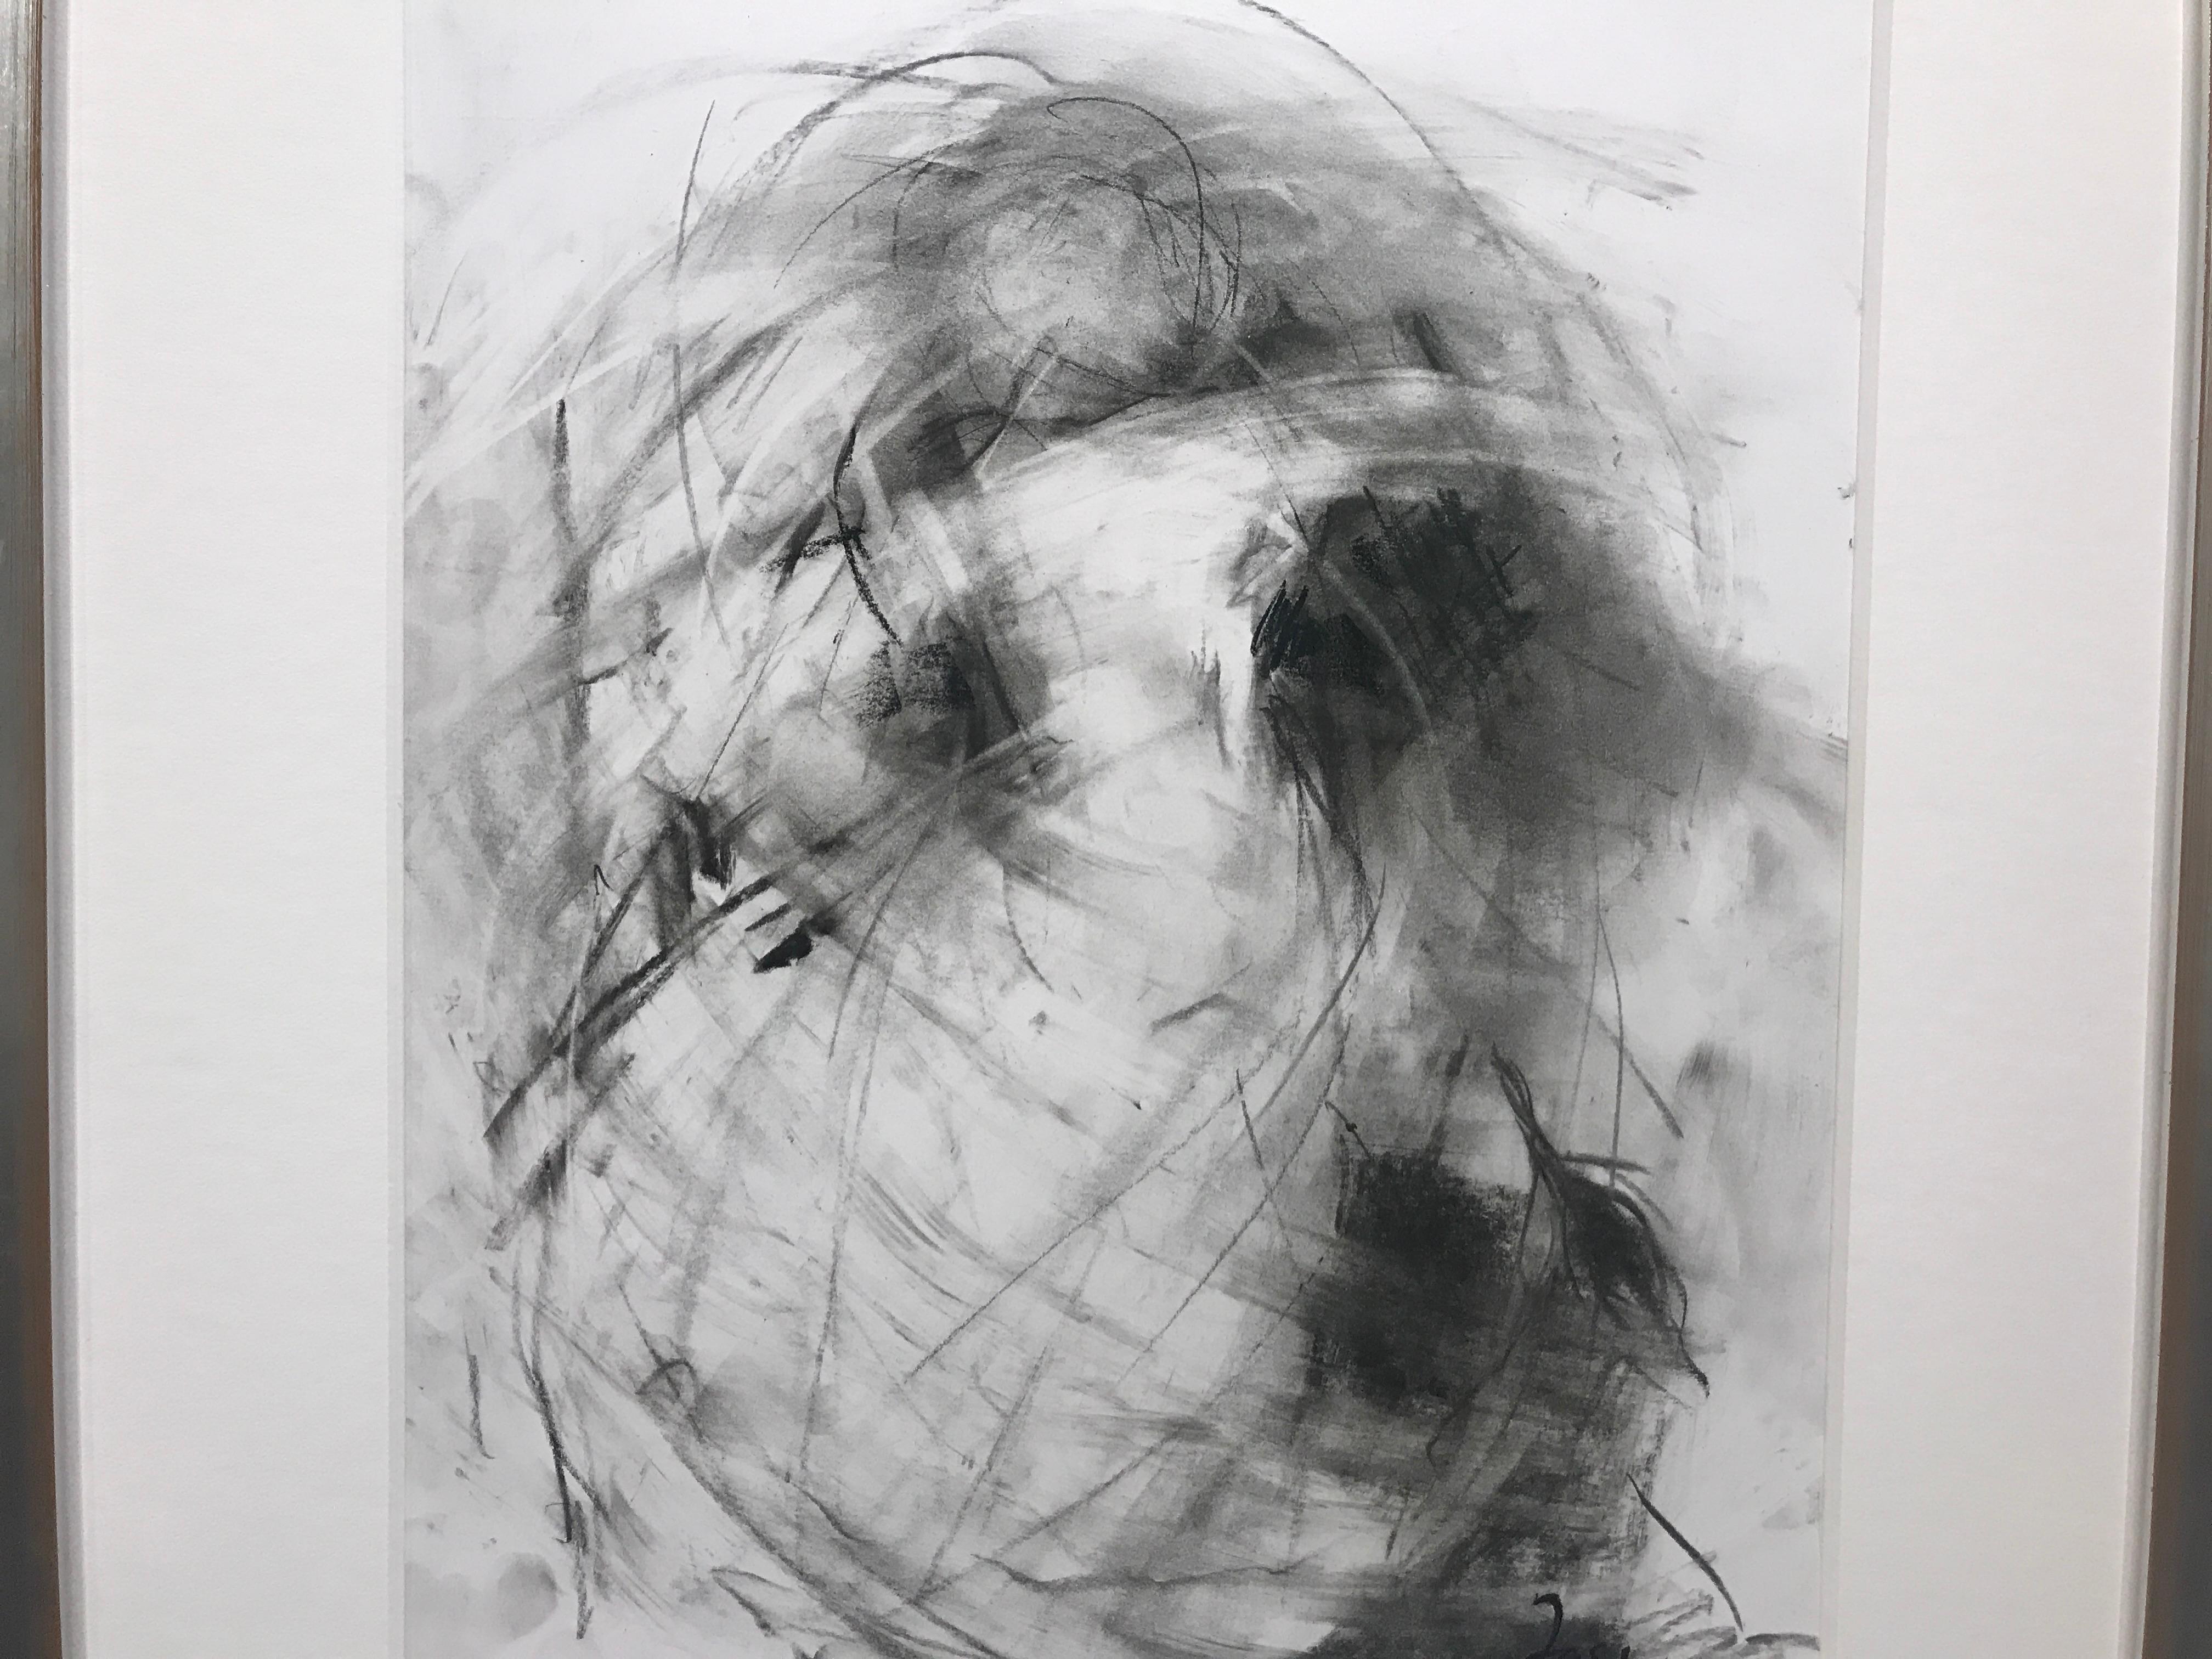 Currents II by Gail Foster 2018 Petite Framed Charcoal on Paper Figurative 4